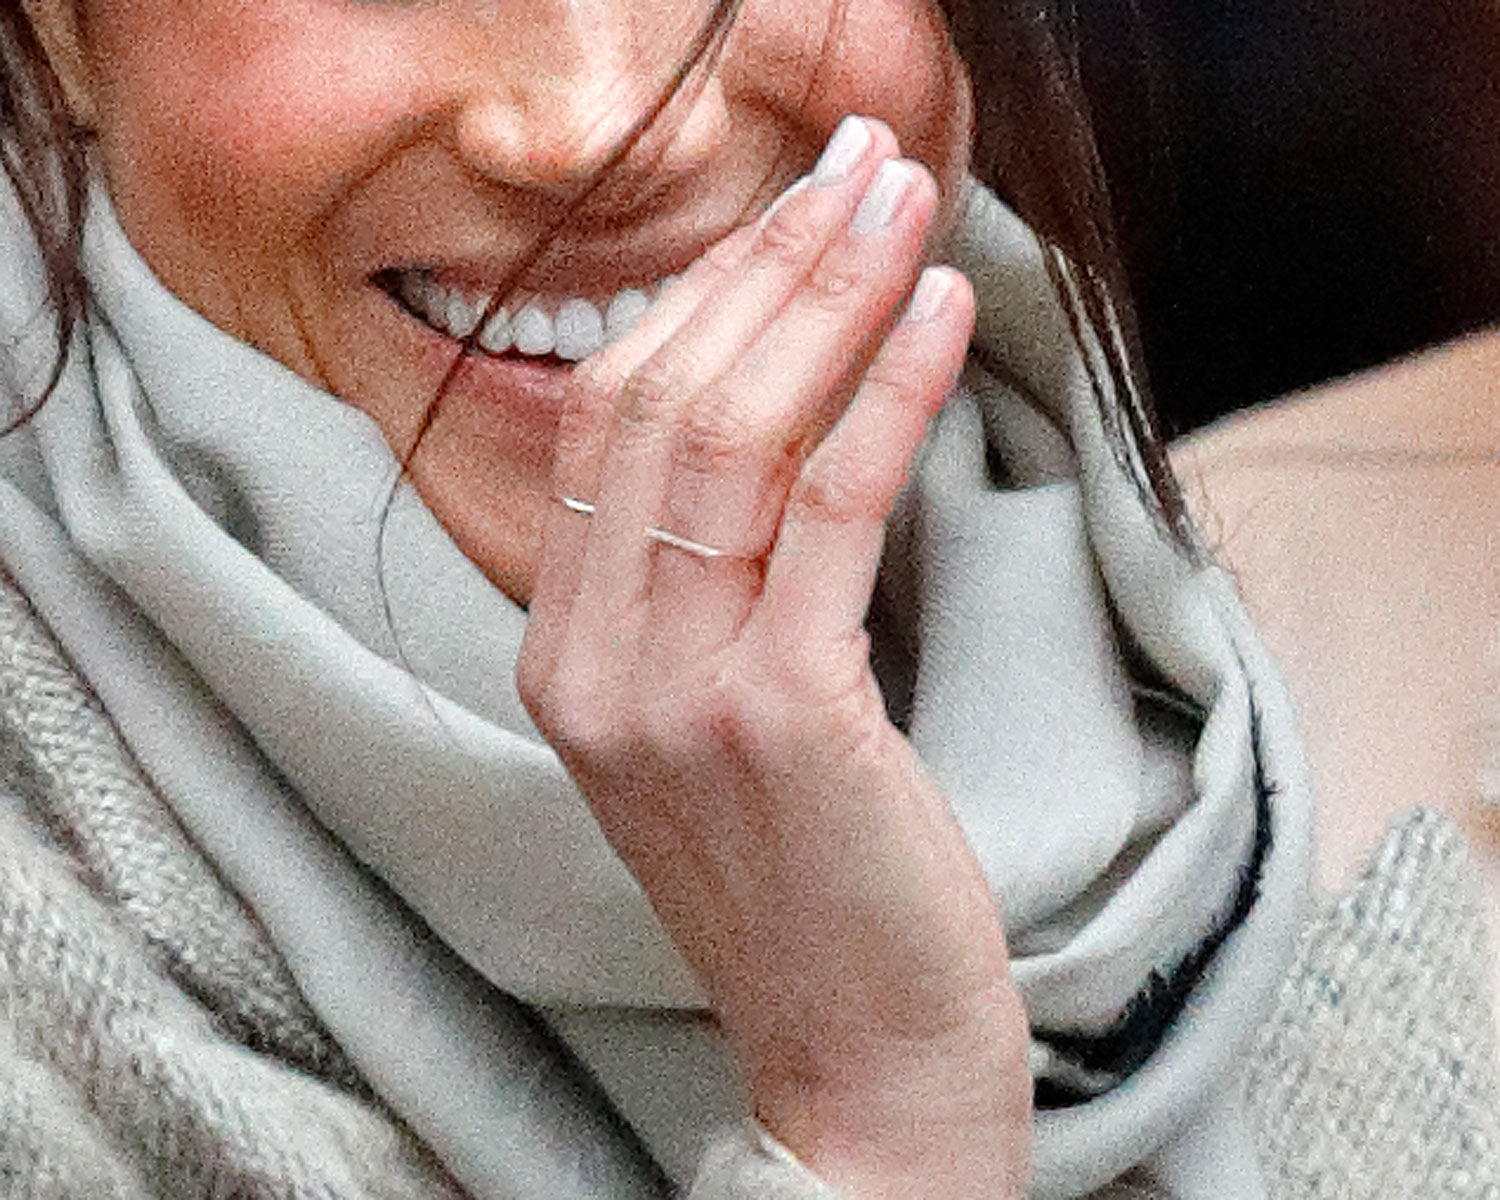 Meghan Markle’s Other Ring Designer Speaks Out About Her Style: “I Don’t Think Big Brand Names Define Her”